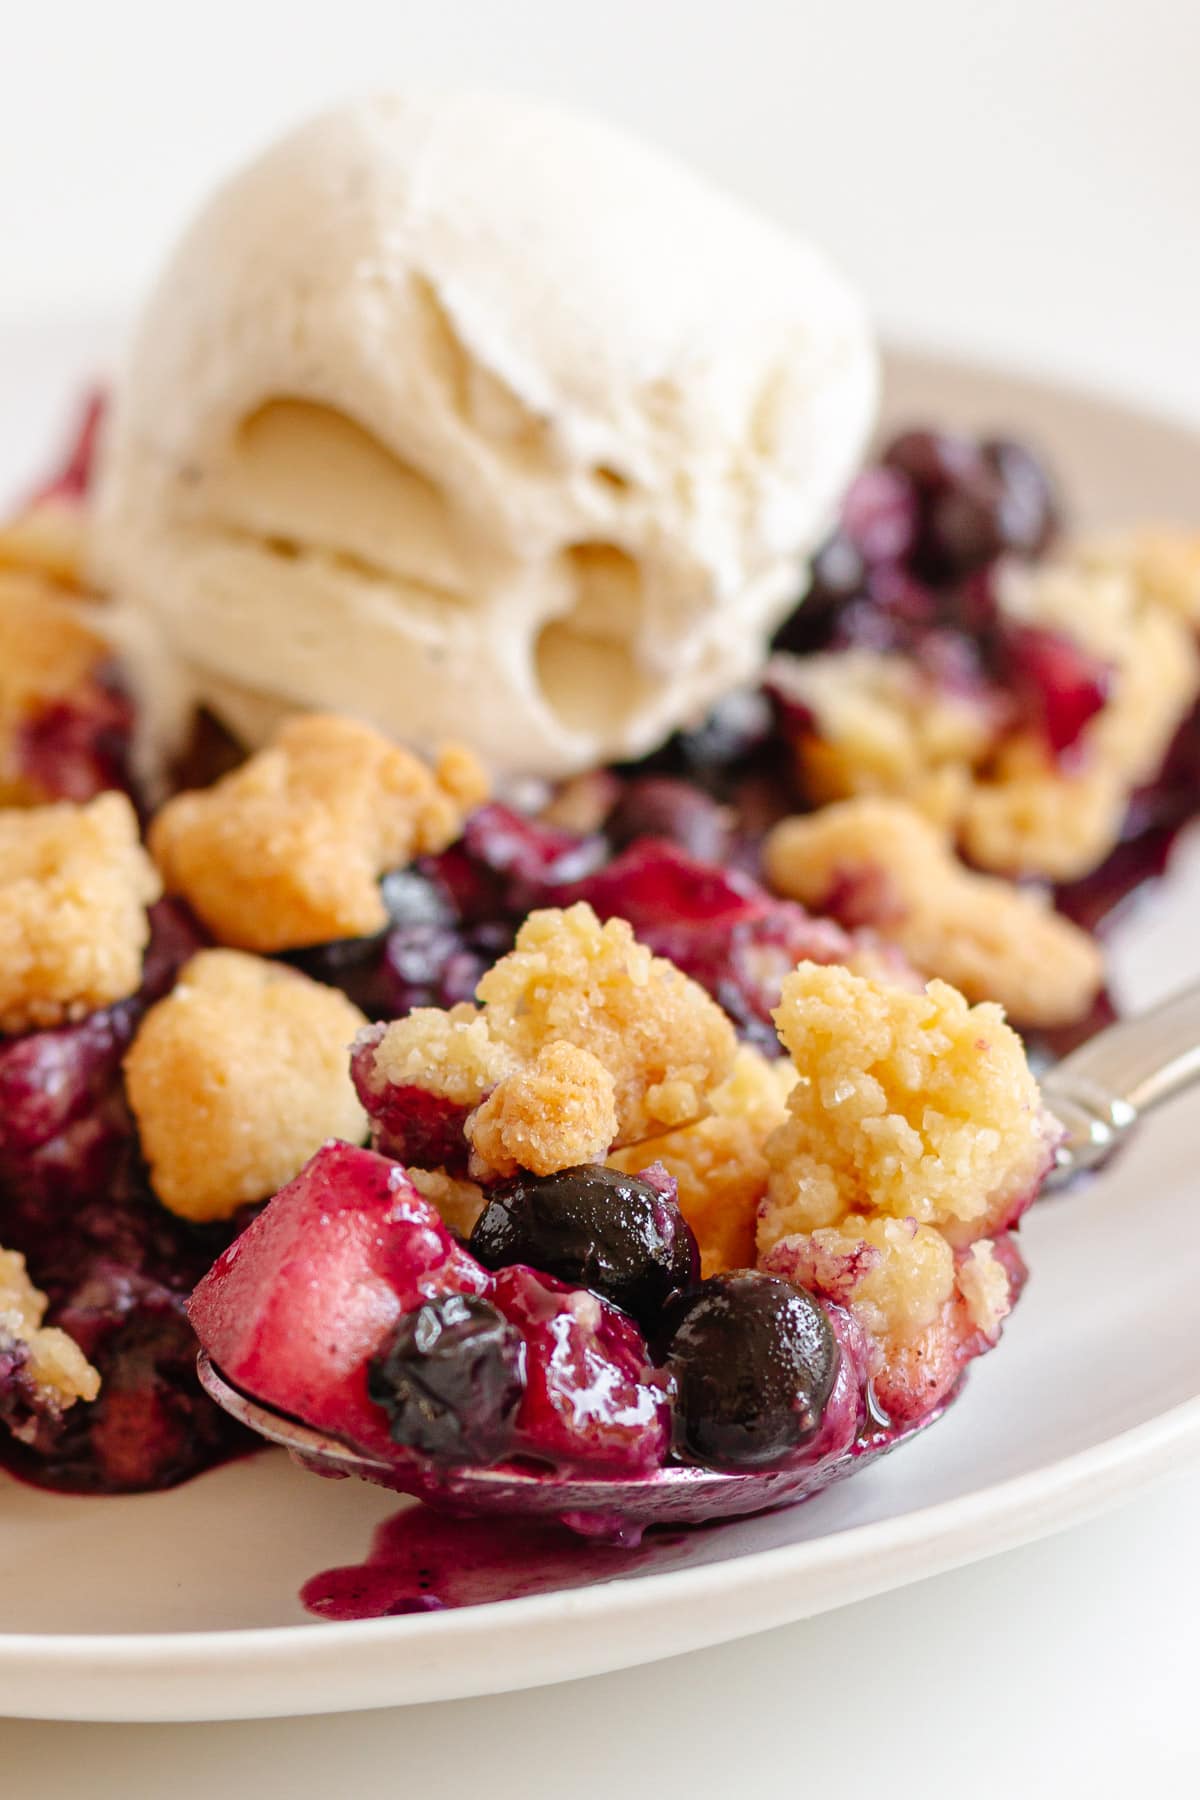 Spoonful of blueberry apple crumble dessert.